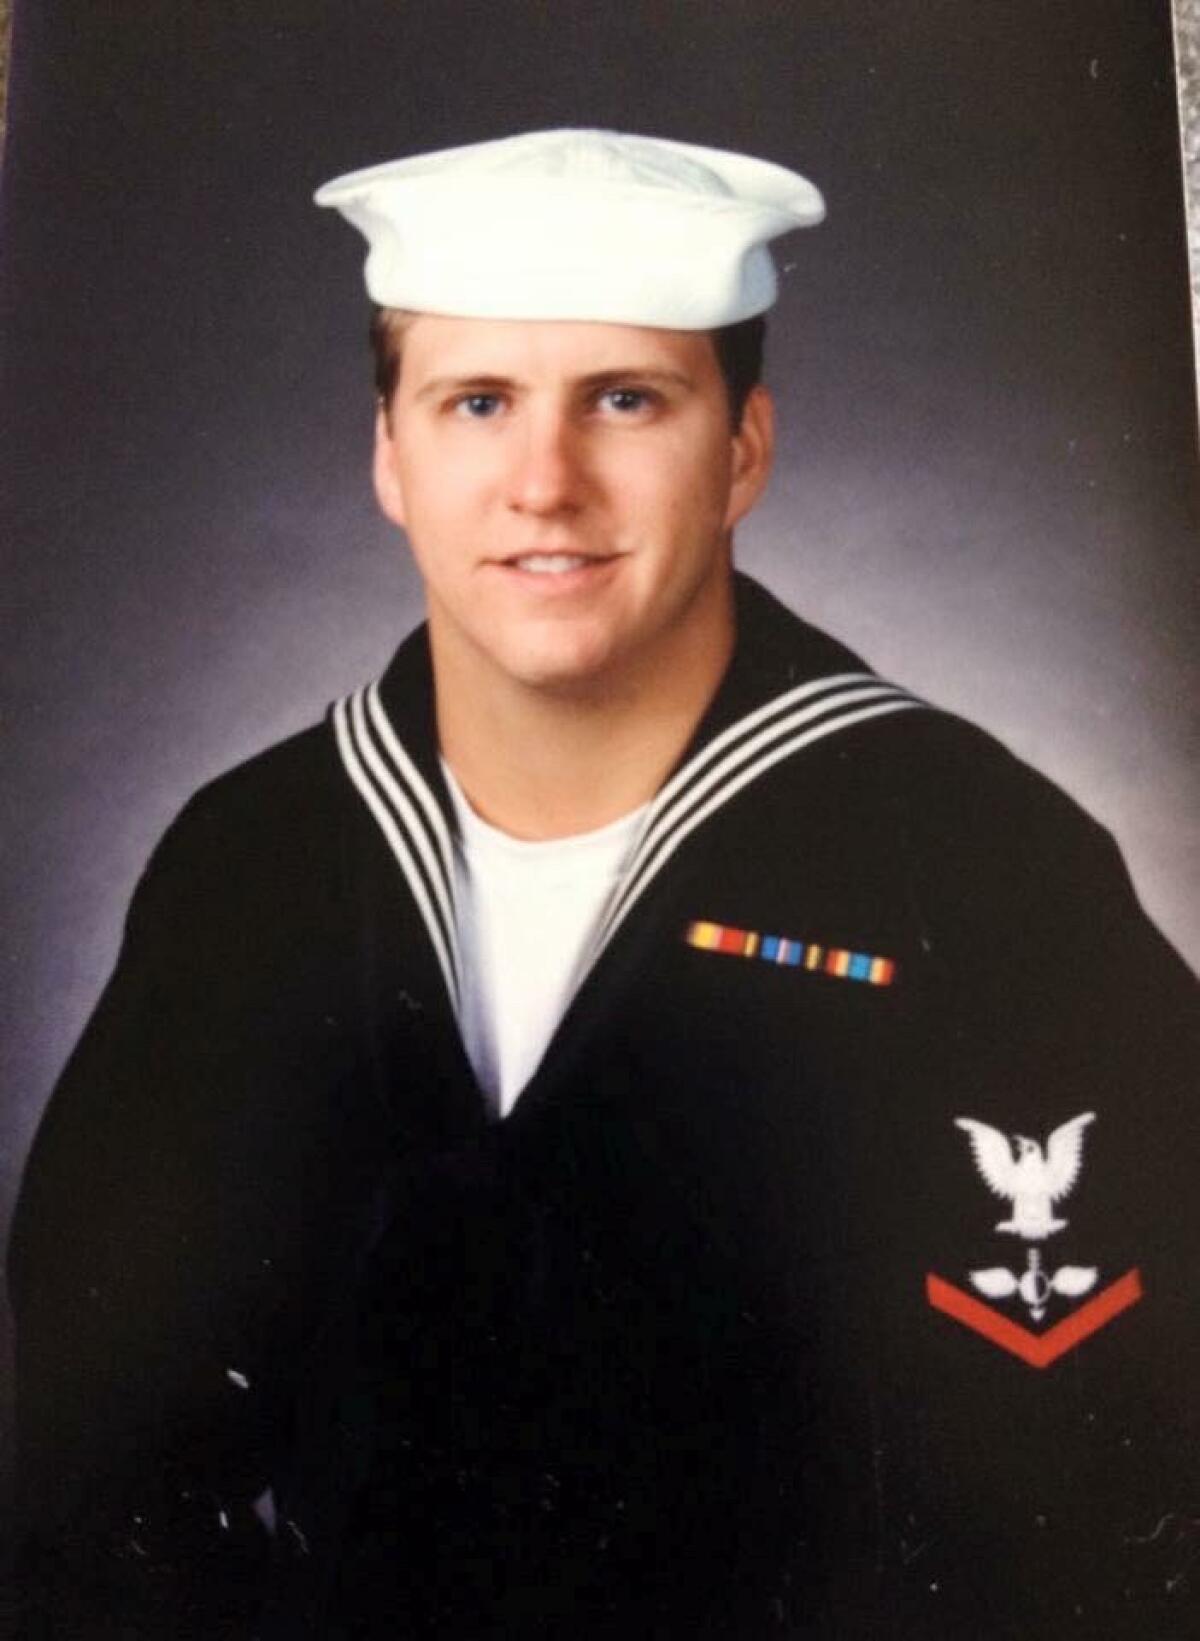 Matt Fairchild served in the Navy and the Army.